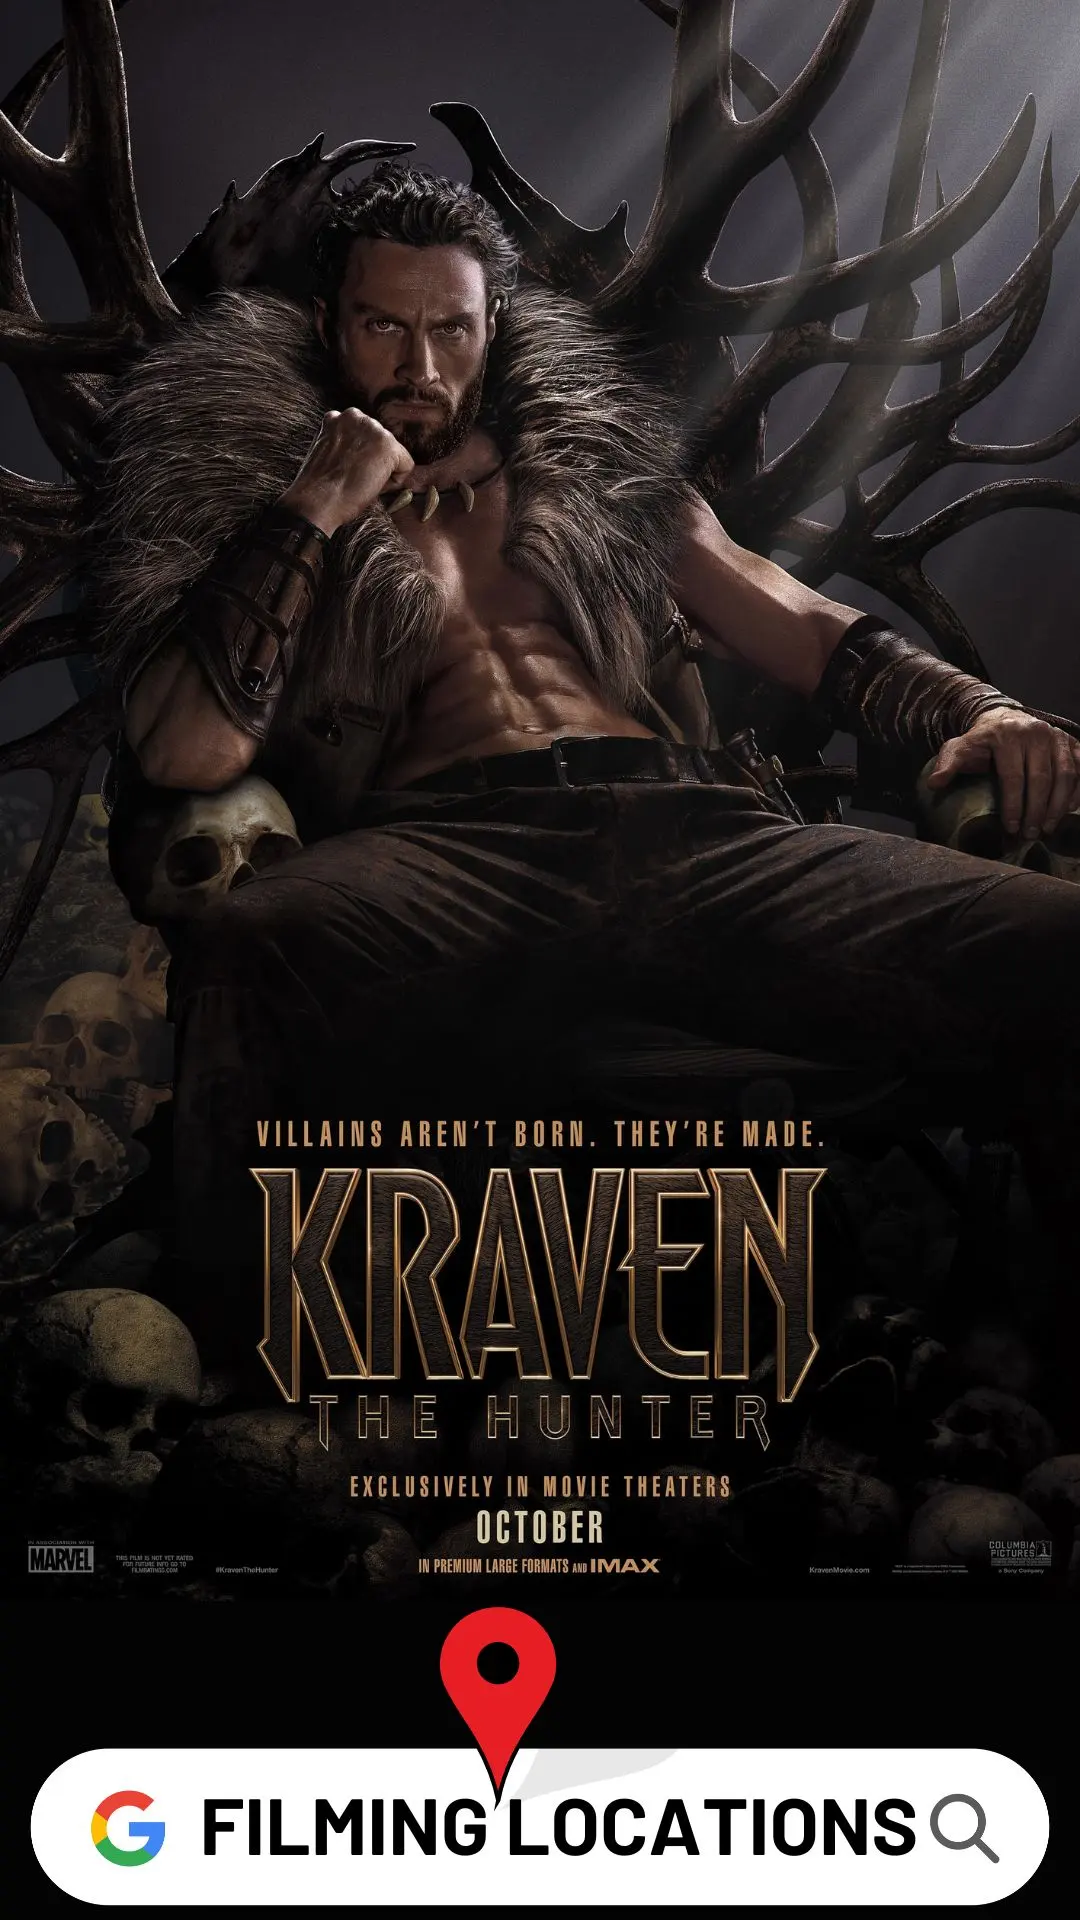 Kraven the Hunter Filming Locations